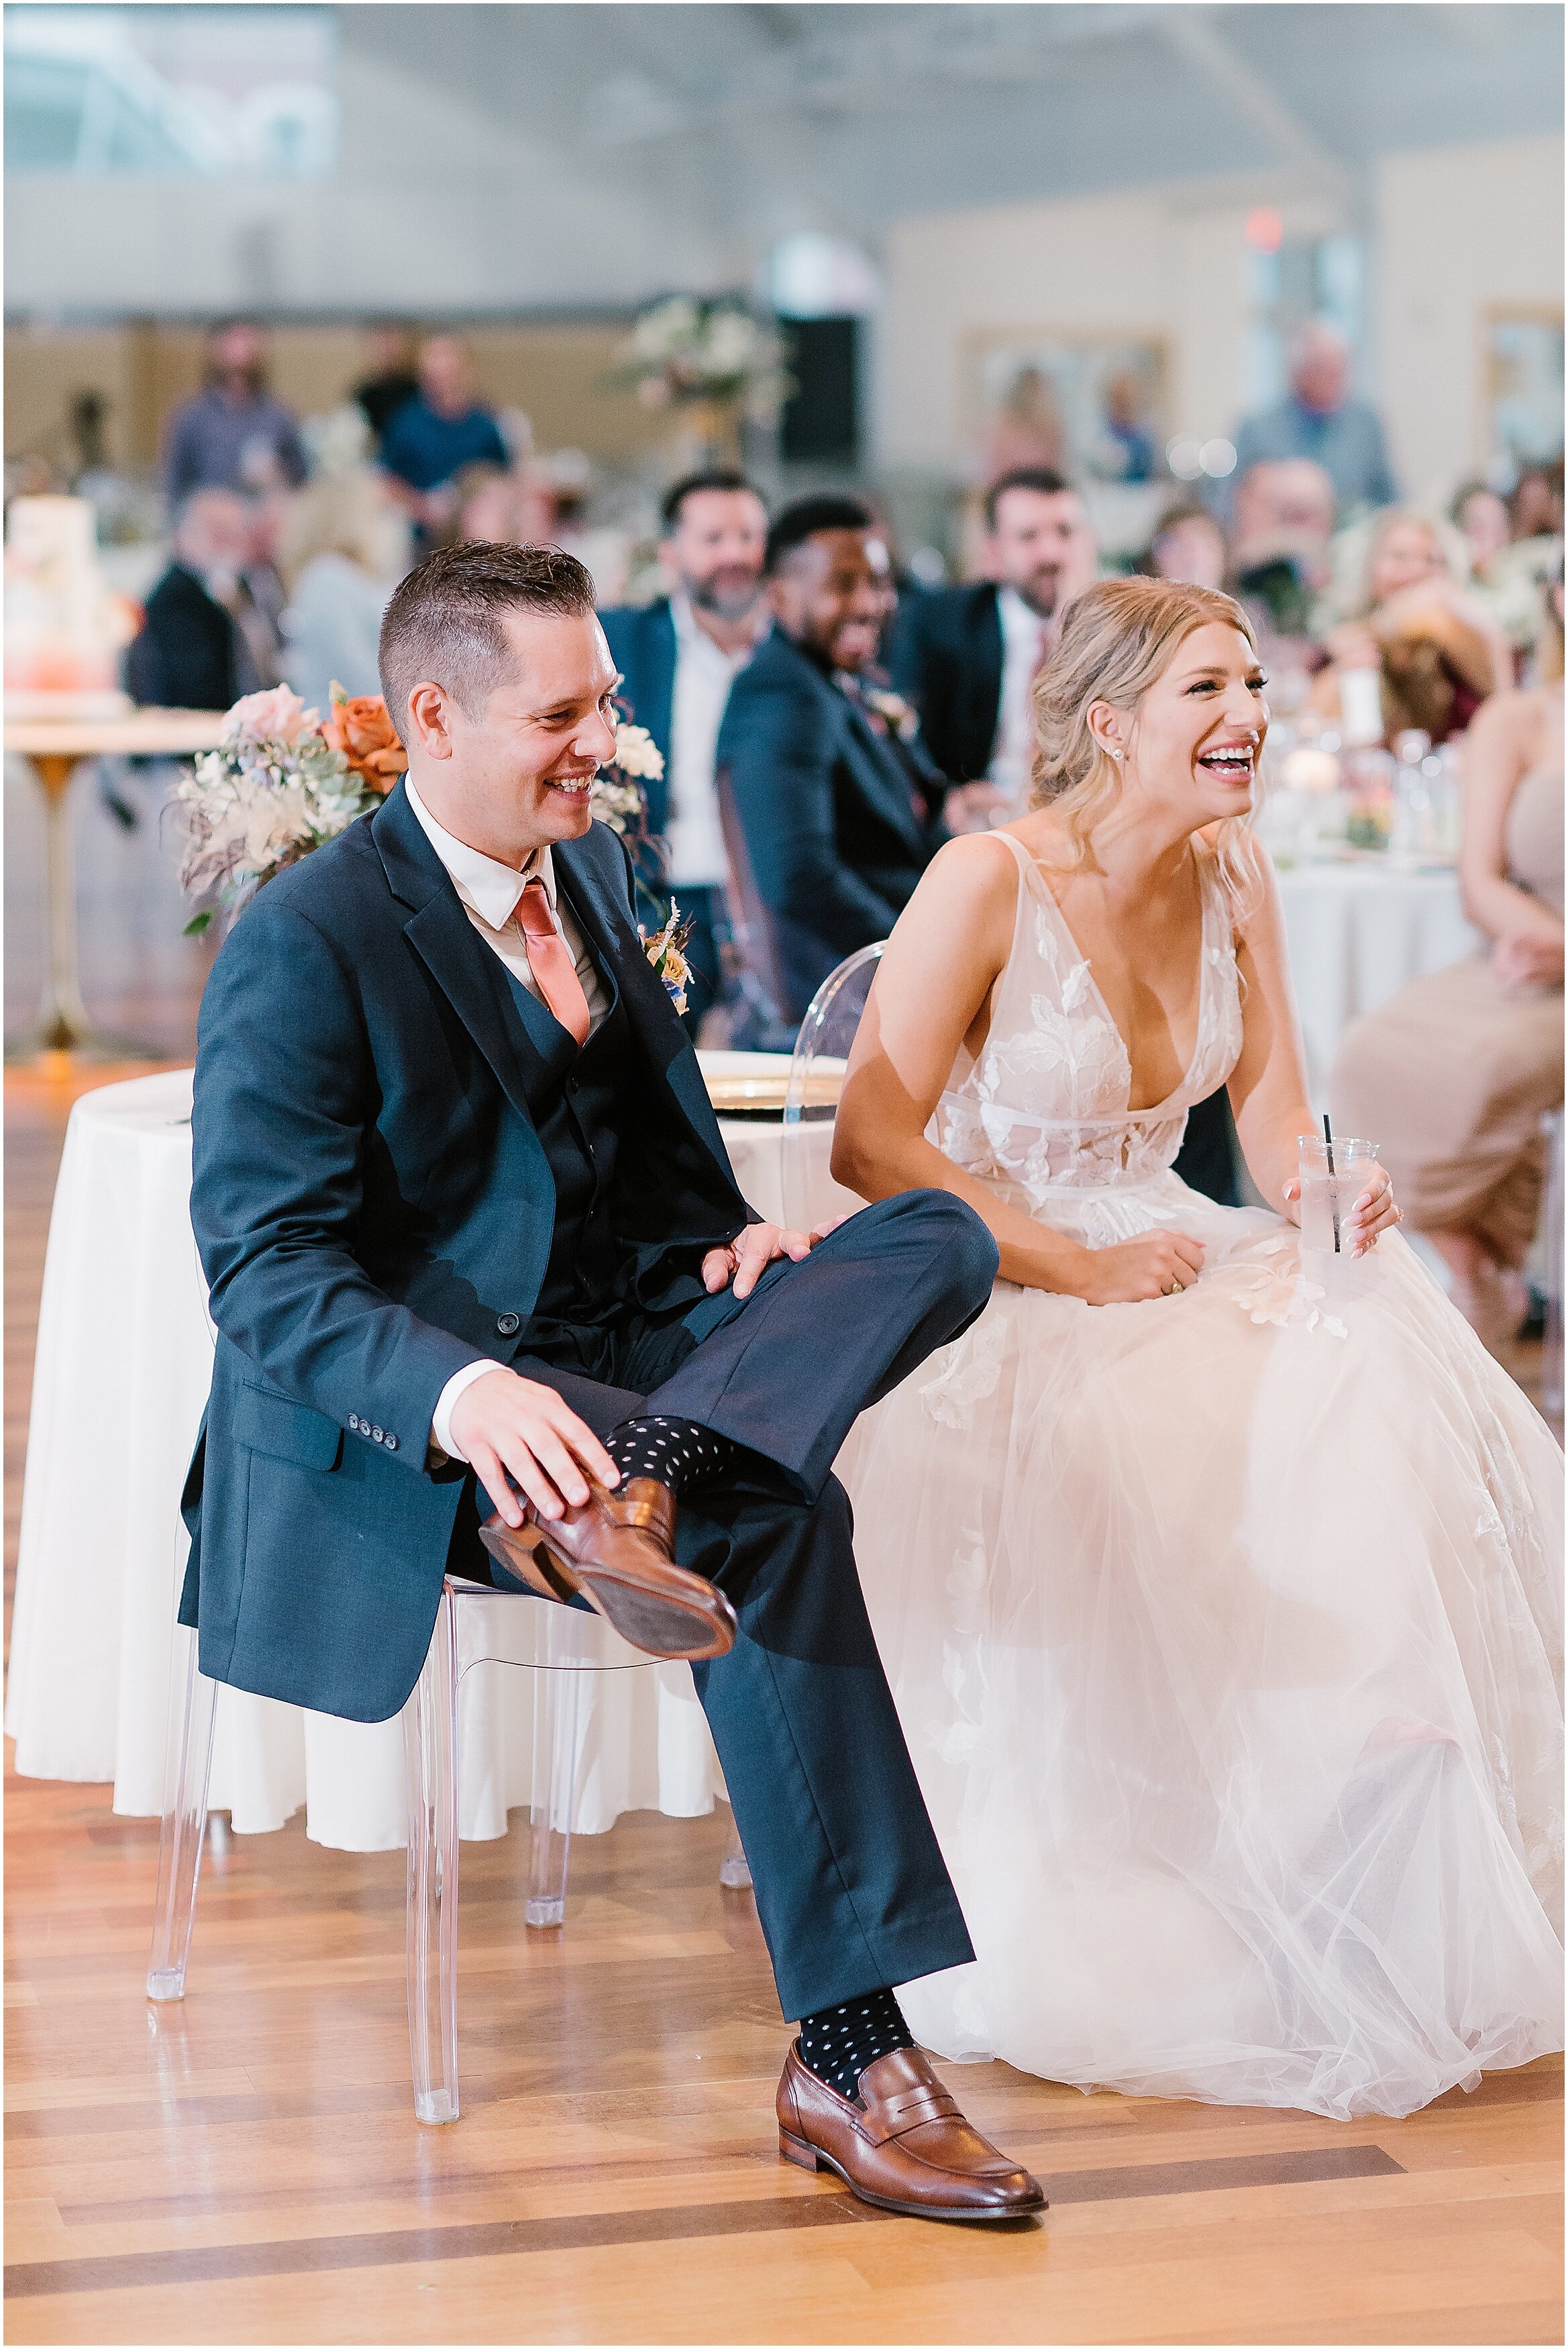 Rebecca Shehorn Photography Colleen and Kyle Inn at Irwin Gardens Wedding-877_The Commons Columbus Inn at Irwin Garden Indianapolis Wedding Photographer.jpg